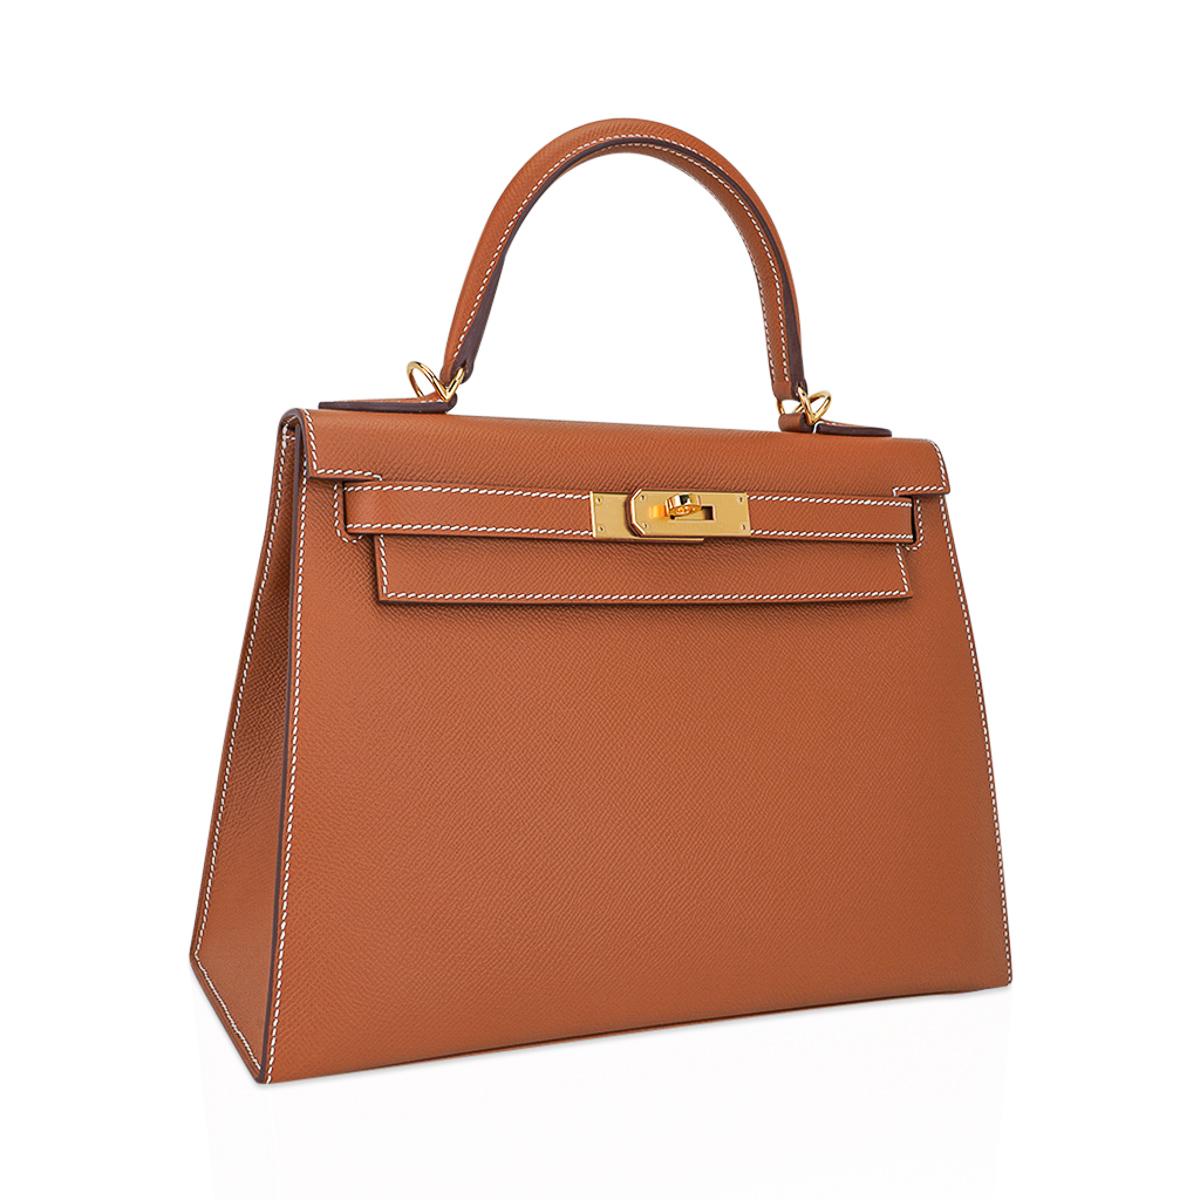 Mightychic offers an Hermes Kelly Sellier 28 featured in iconic Gold.
This classic epsom leather Hermes Kelly Sellier is perfect for year round wear.
Rich with Gold Hardware.
Divine size for day to evening.
Comes with signature Hermes box, raincoat,